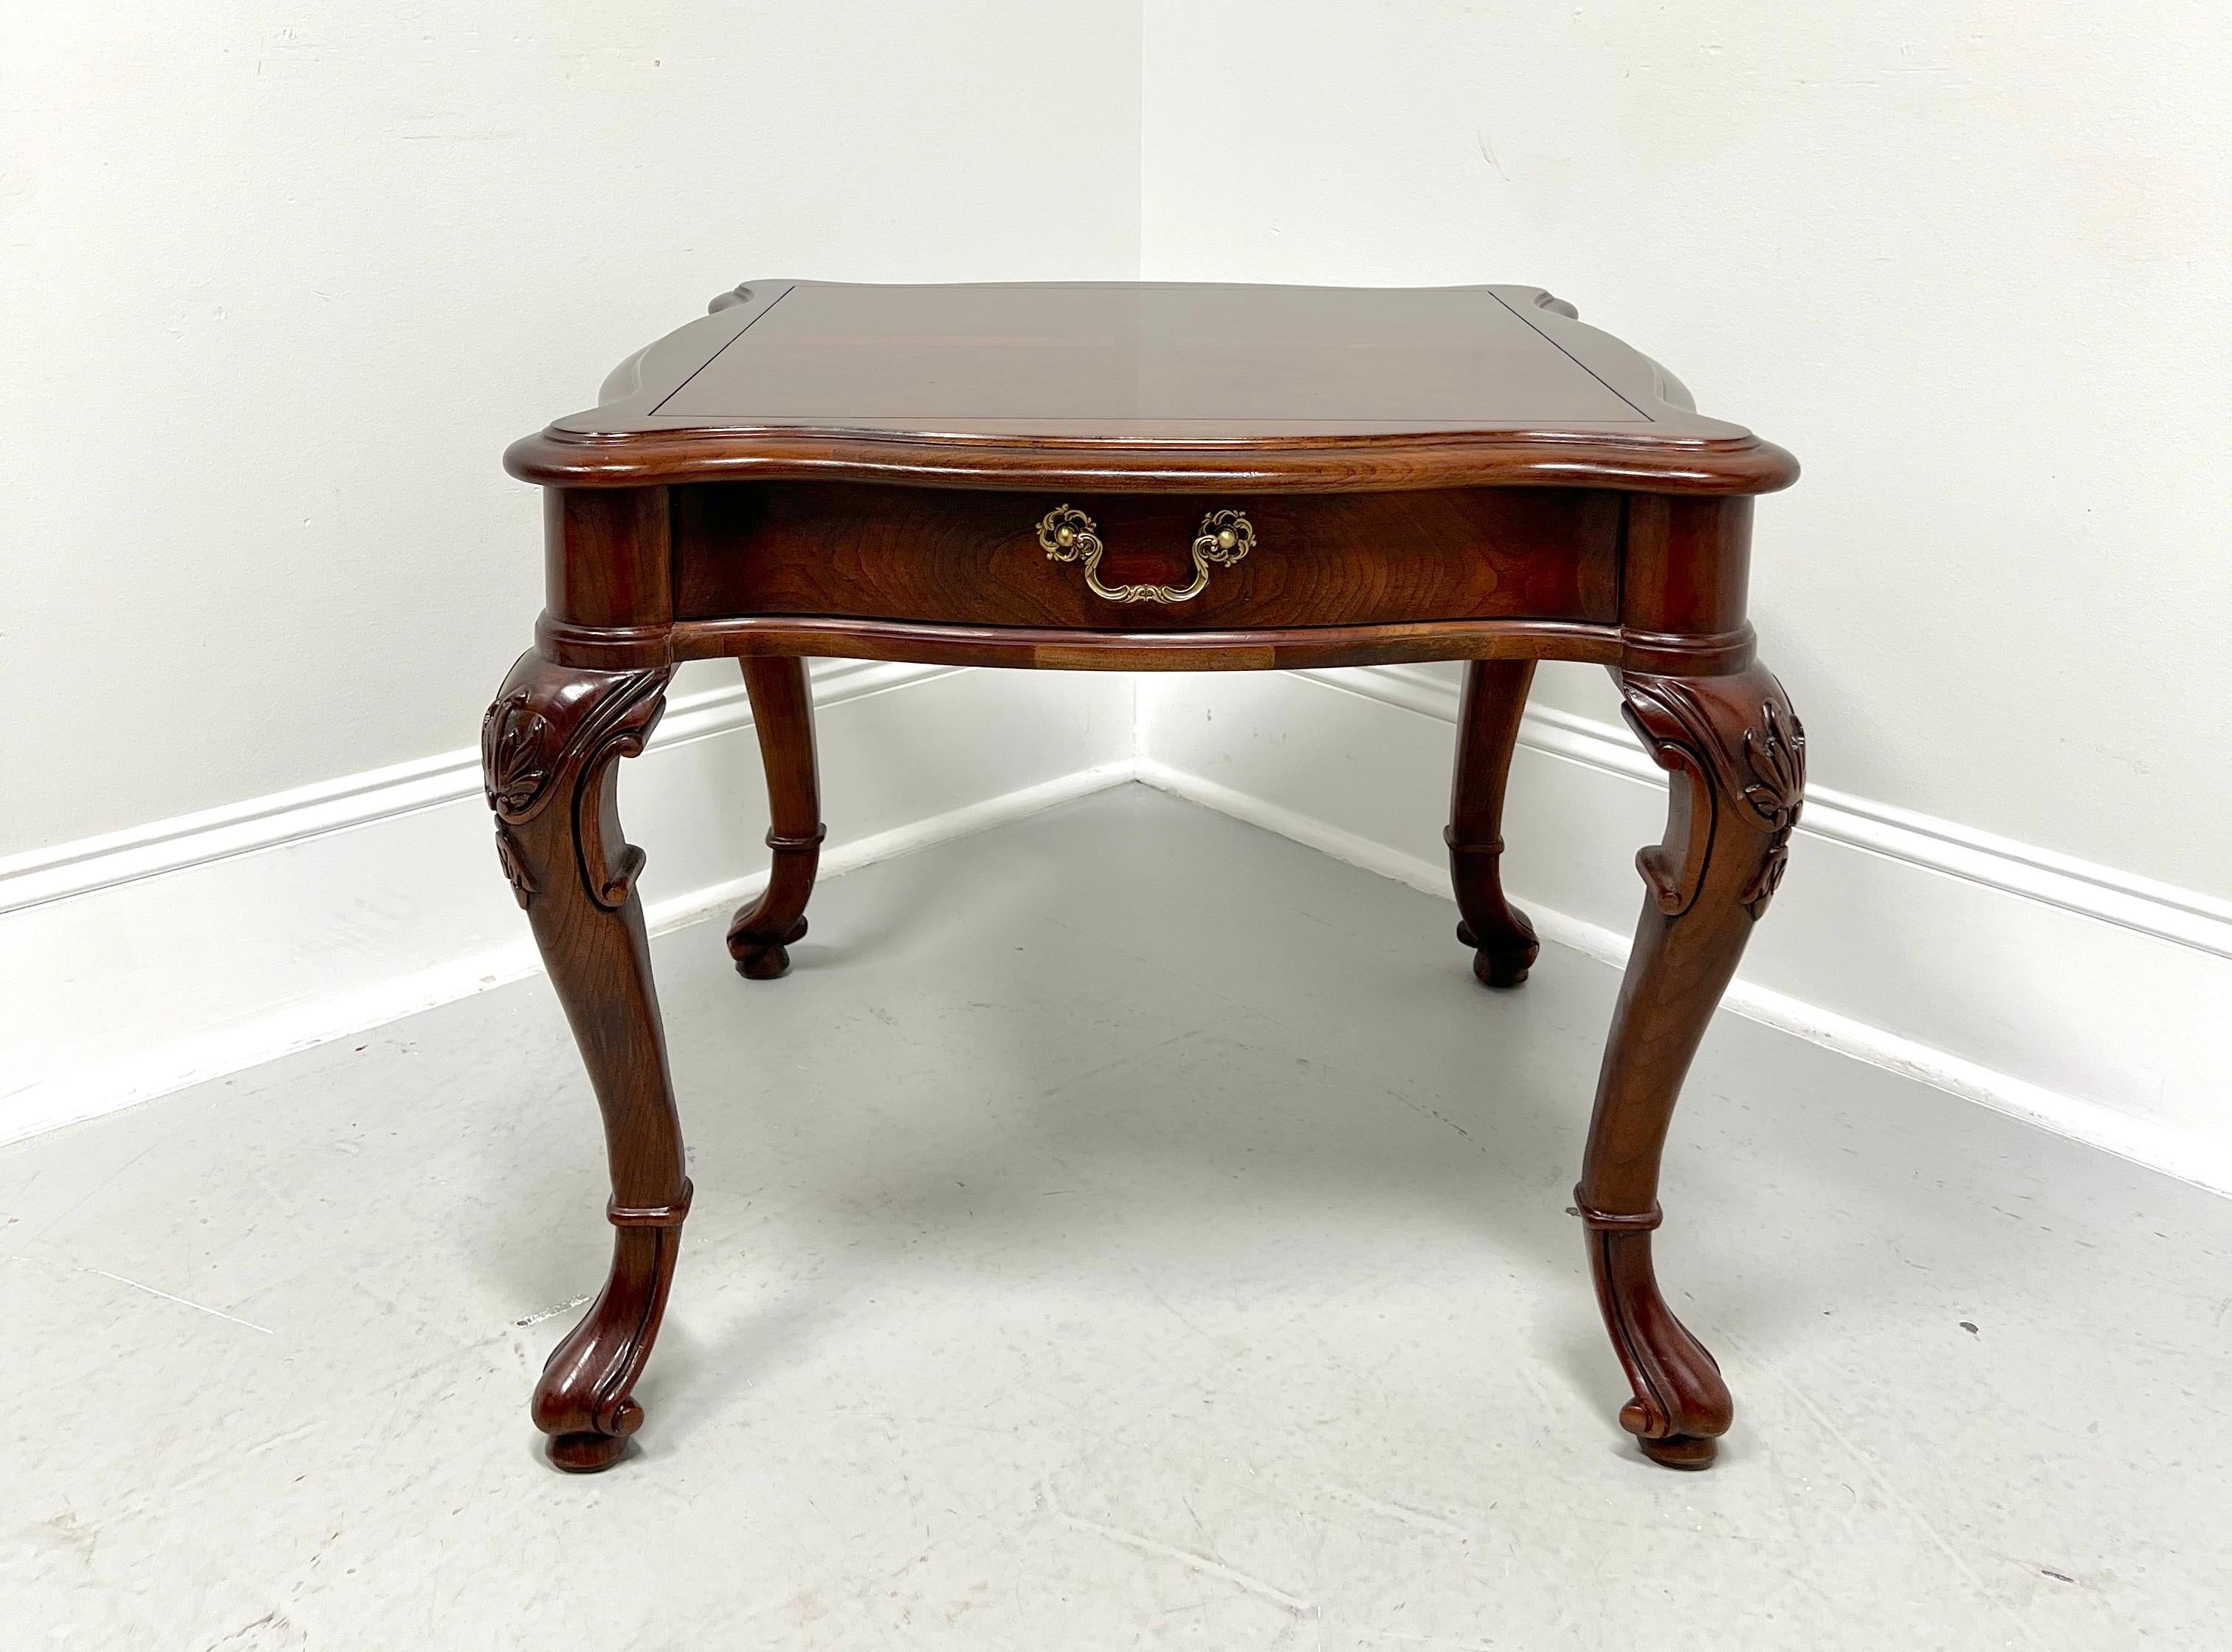 An Italian Provincial style lamp table by Century Furniture, from their Cardella Collection. Cherry wood with decorative brass hardware, banded top with bevel edge & rounded corners, serpentine shape, finished on all sides, carved knees, cabriole